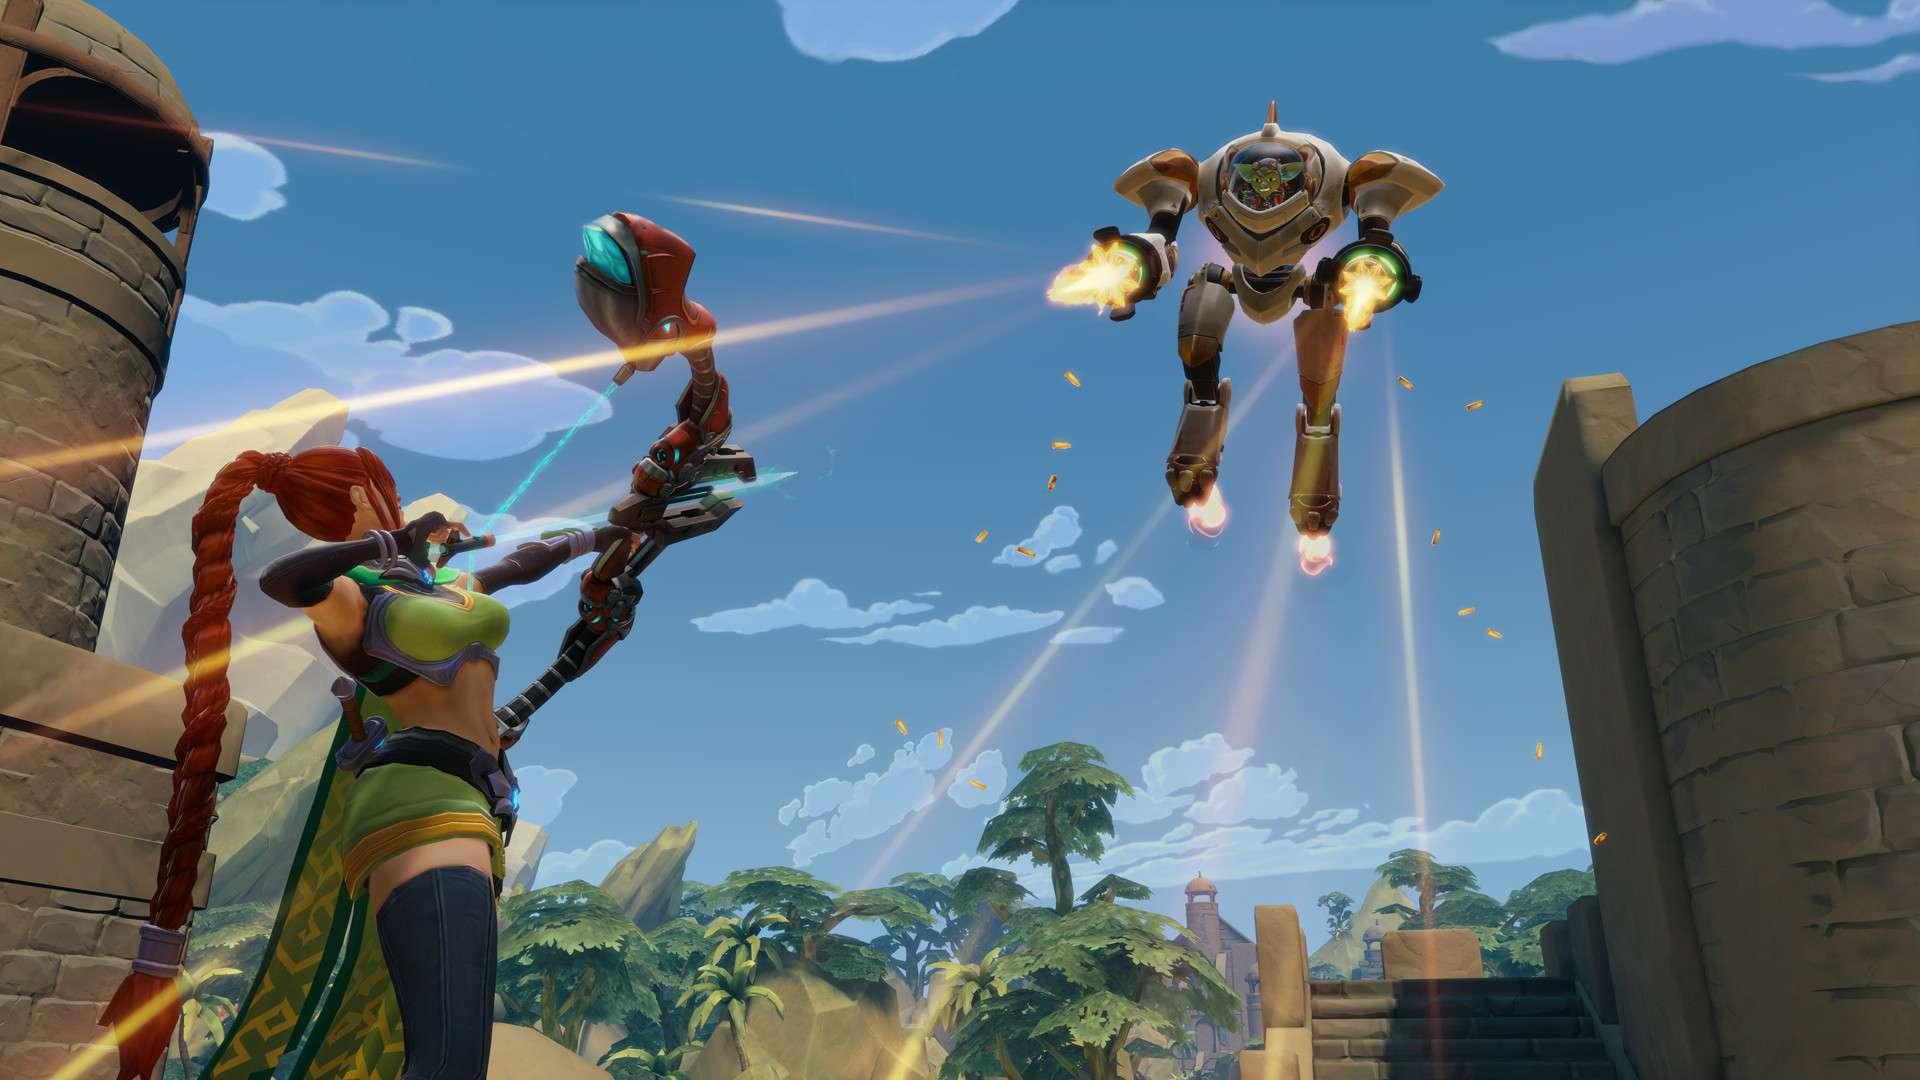 Paladins is a free to play team shooter on Steam